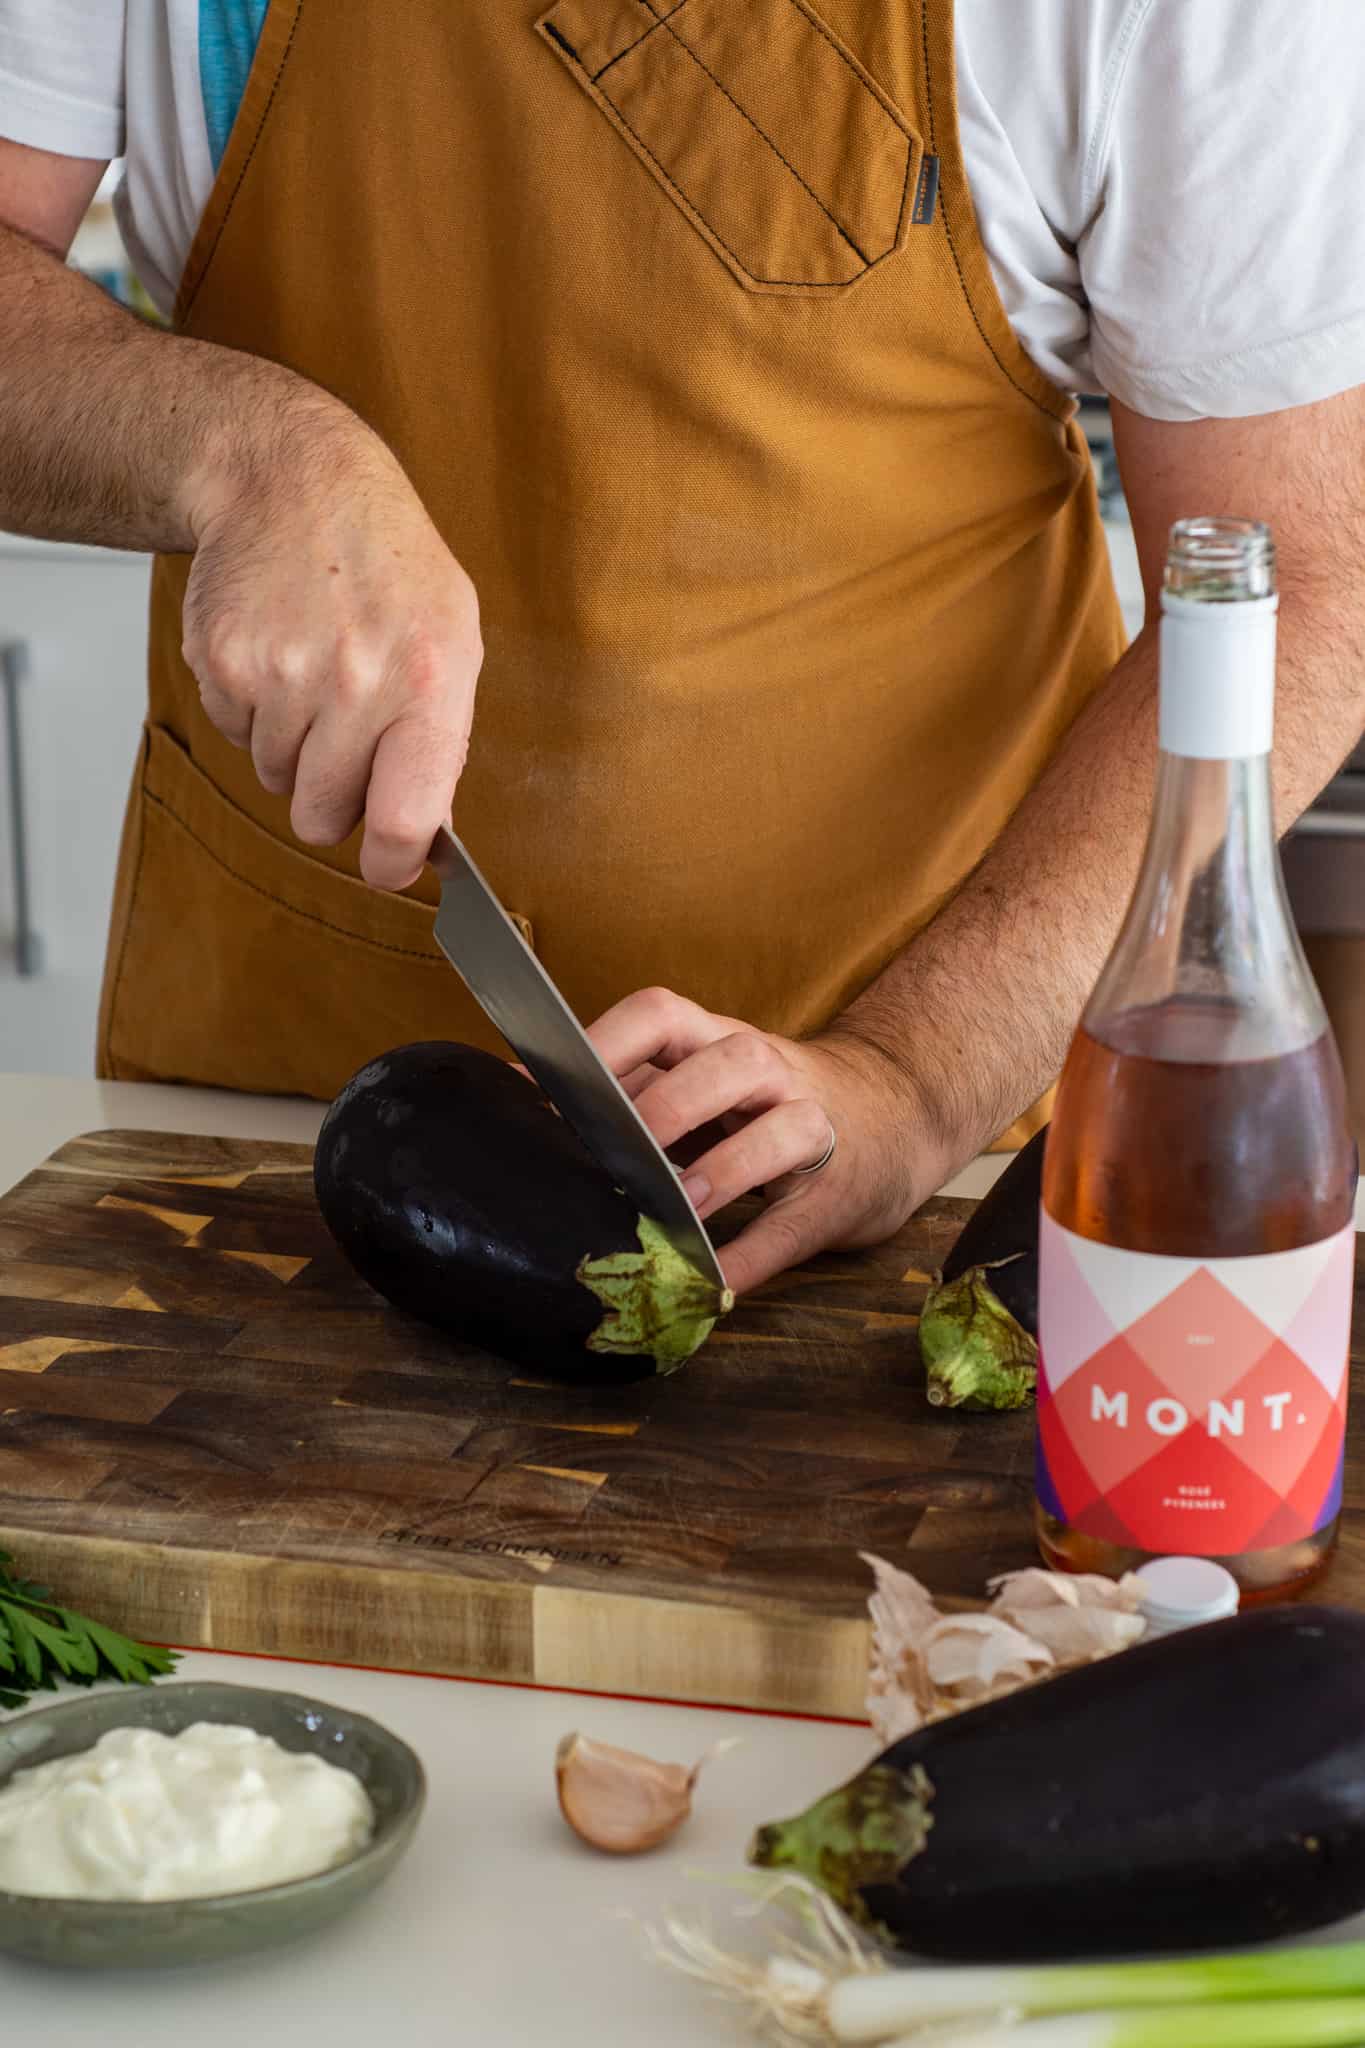 Someone cutting an aubergine on chopping board with rose wine beside them 